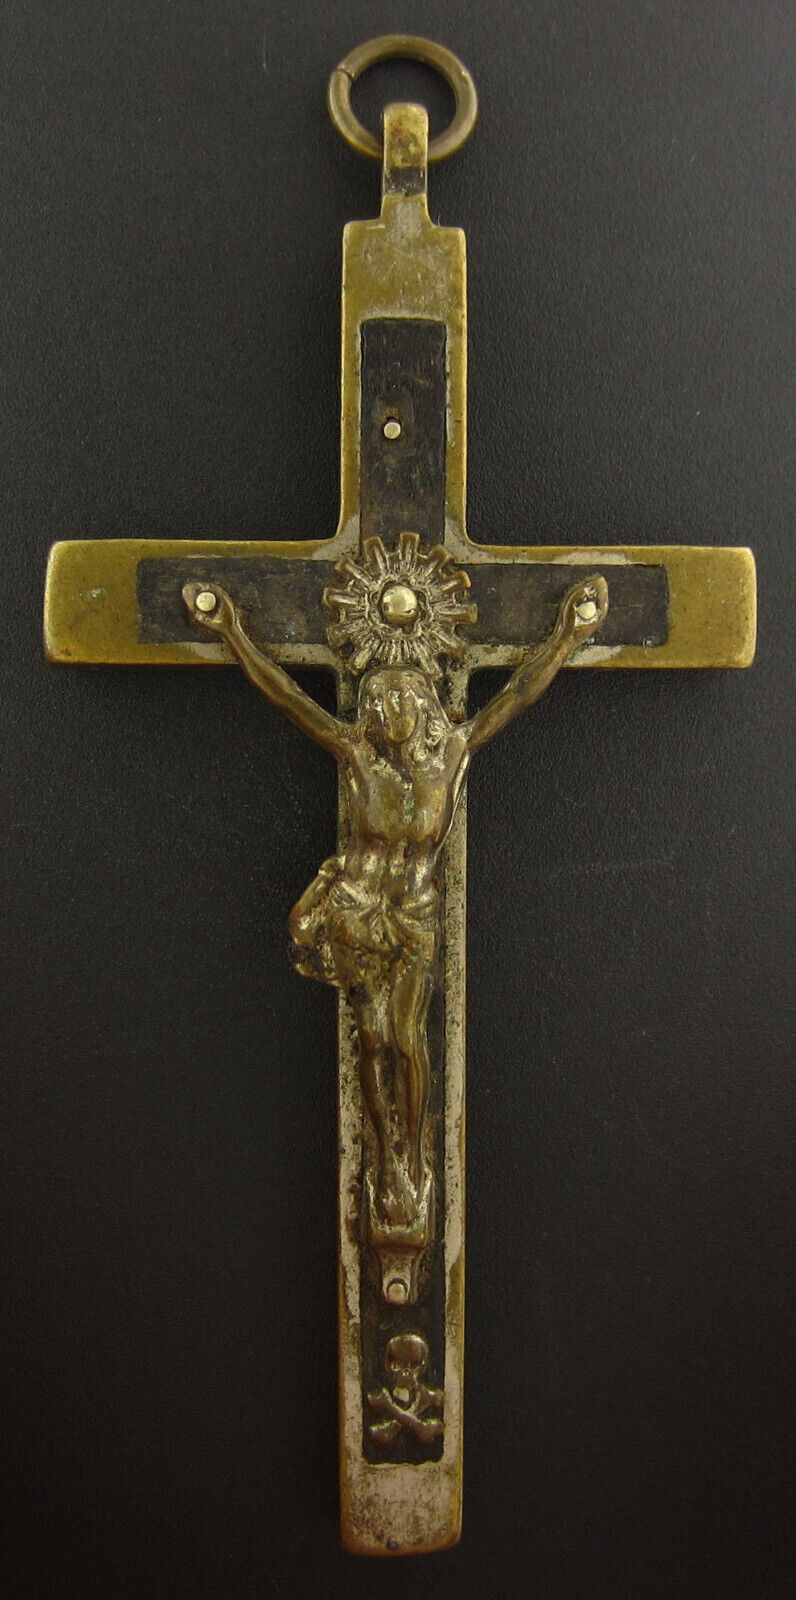 Vintage Small Cross Crucifix Religious Holy Catholic Metal with wood inlay